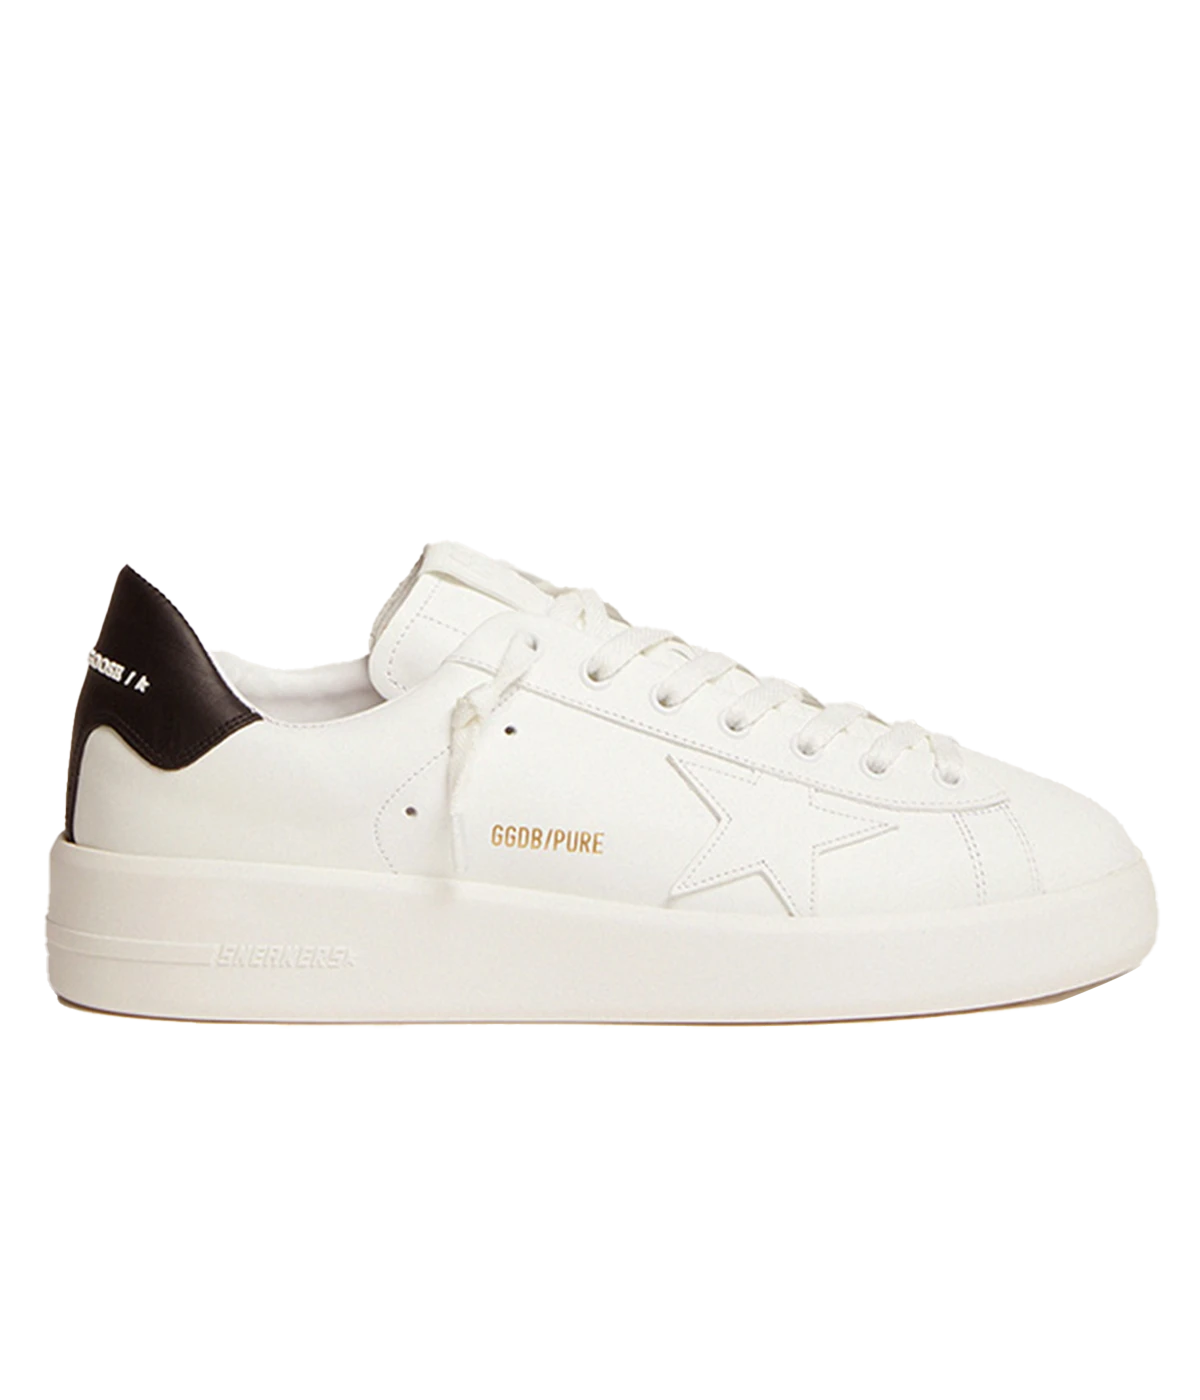 Pure Star Leather Upper in White & Black